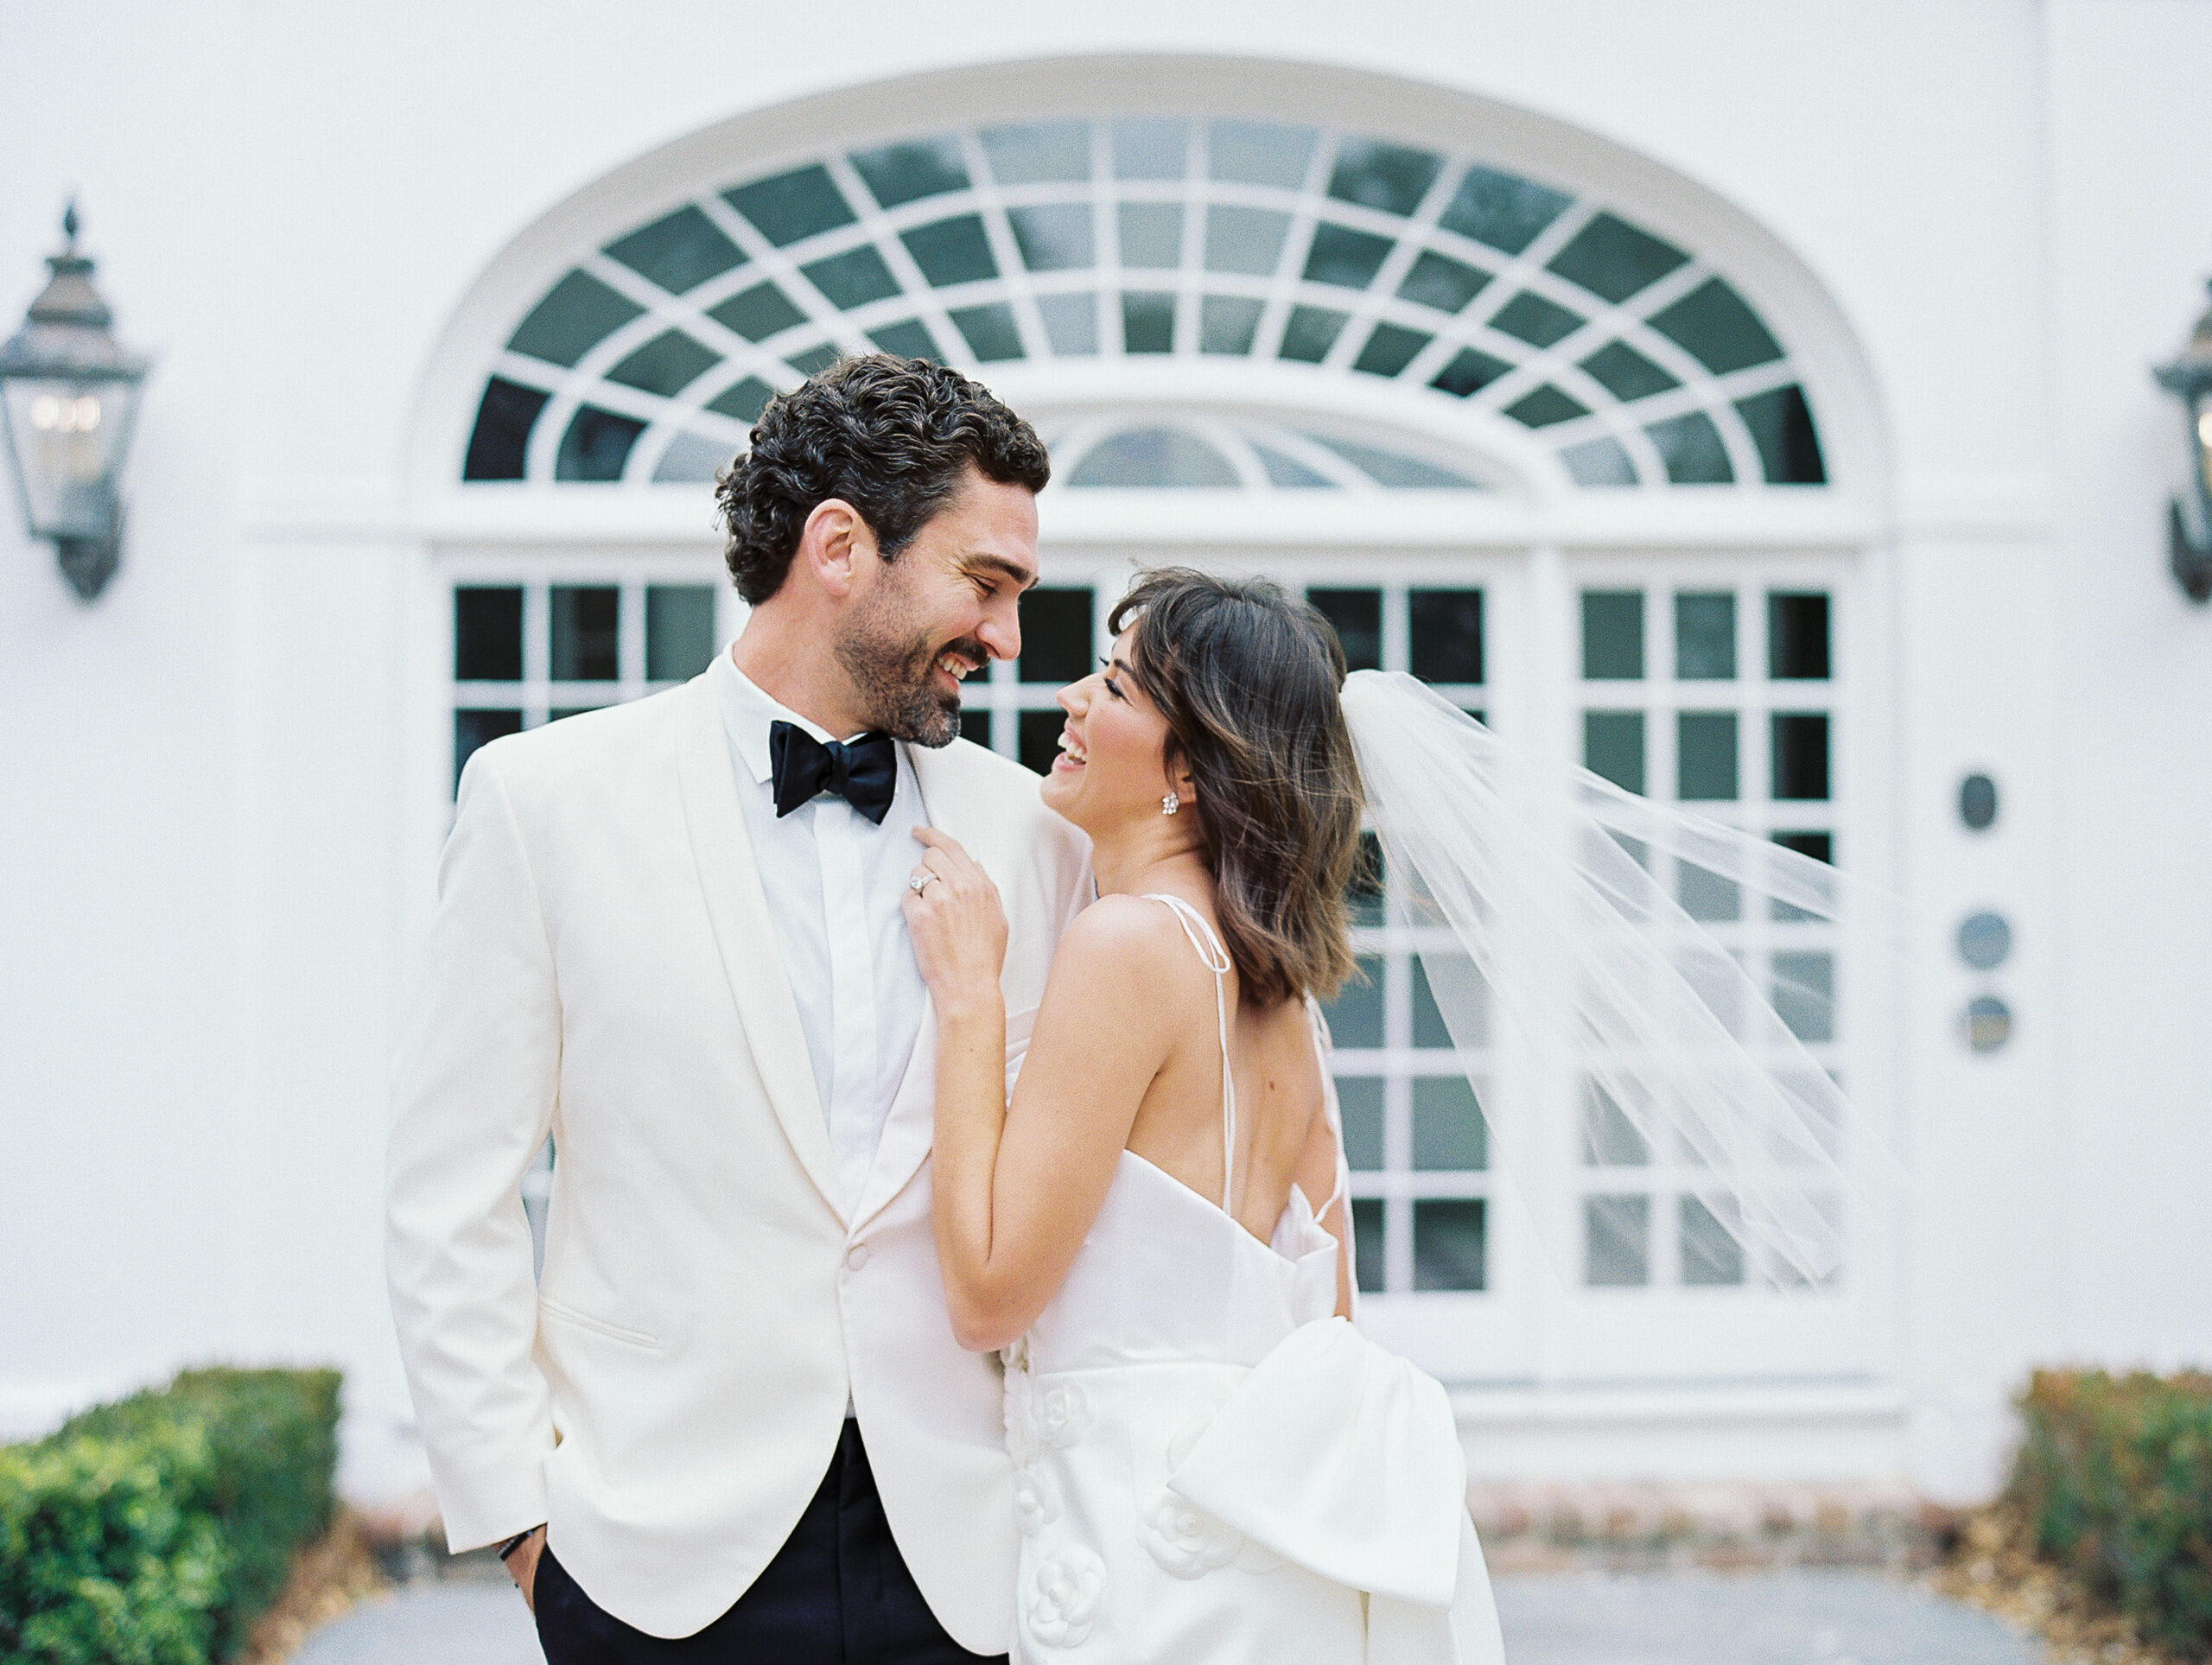 Lowdnes Grove Wedding by destination film wedding photographer Katie Trauffer Photography - bride and groom laugh and embrace in front of white building